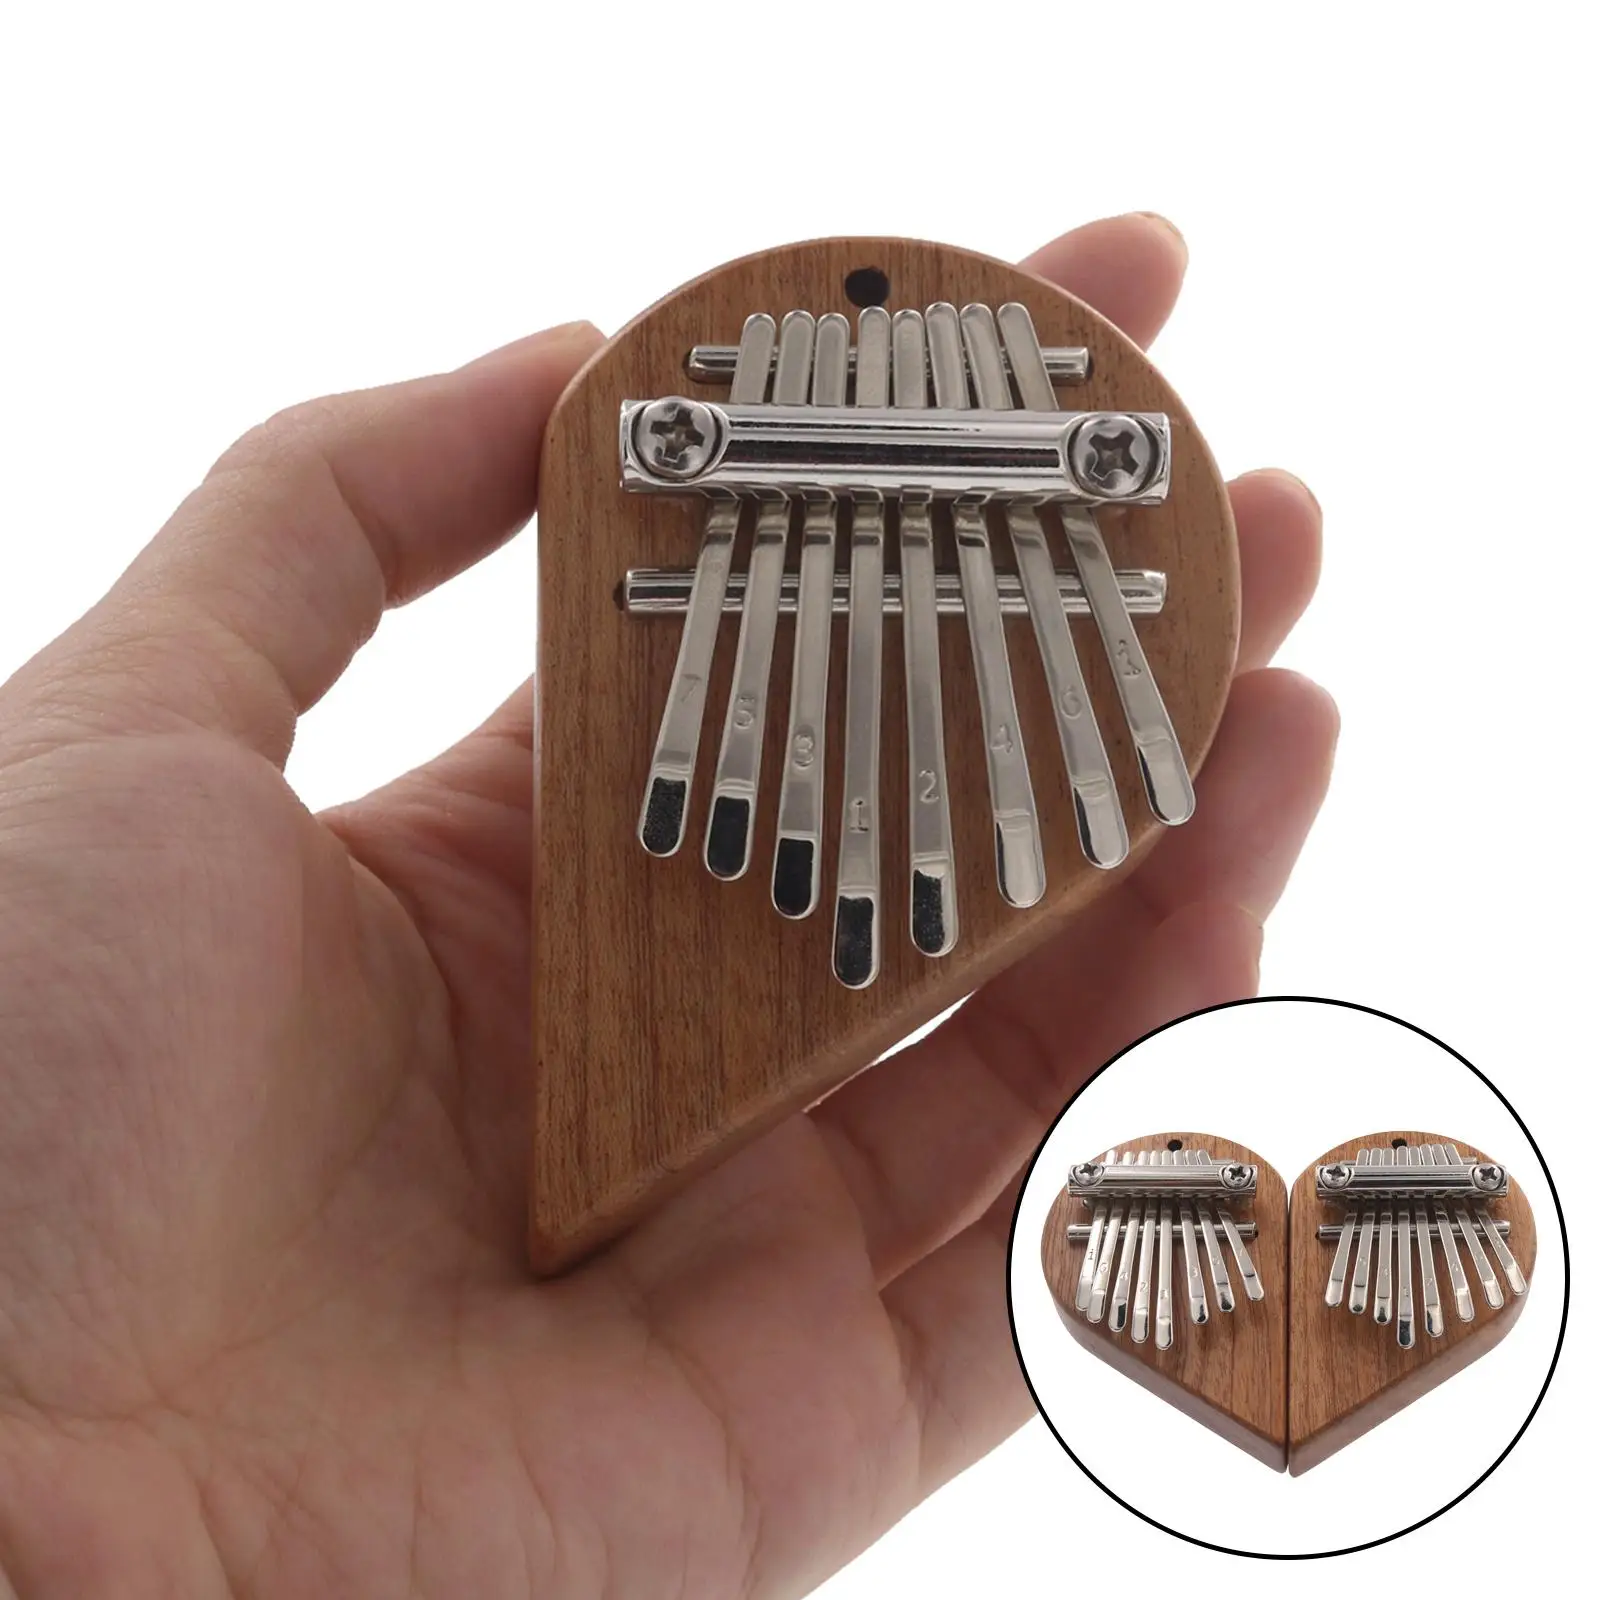 Cute Shaped Thumb Piano Toy with Lanyard Pendant Gift Musical Instrument for Music Lover Hanging Accessories